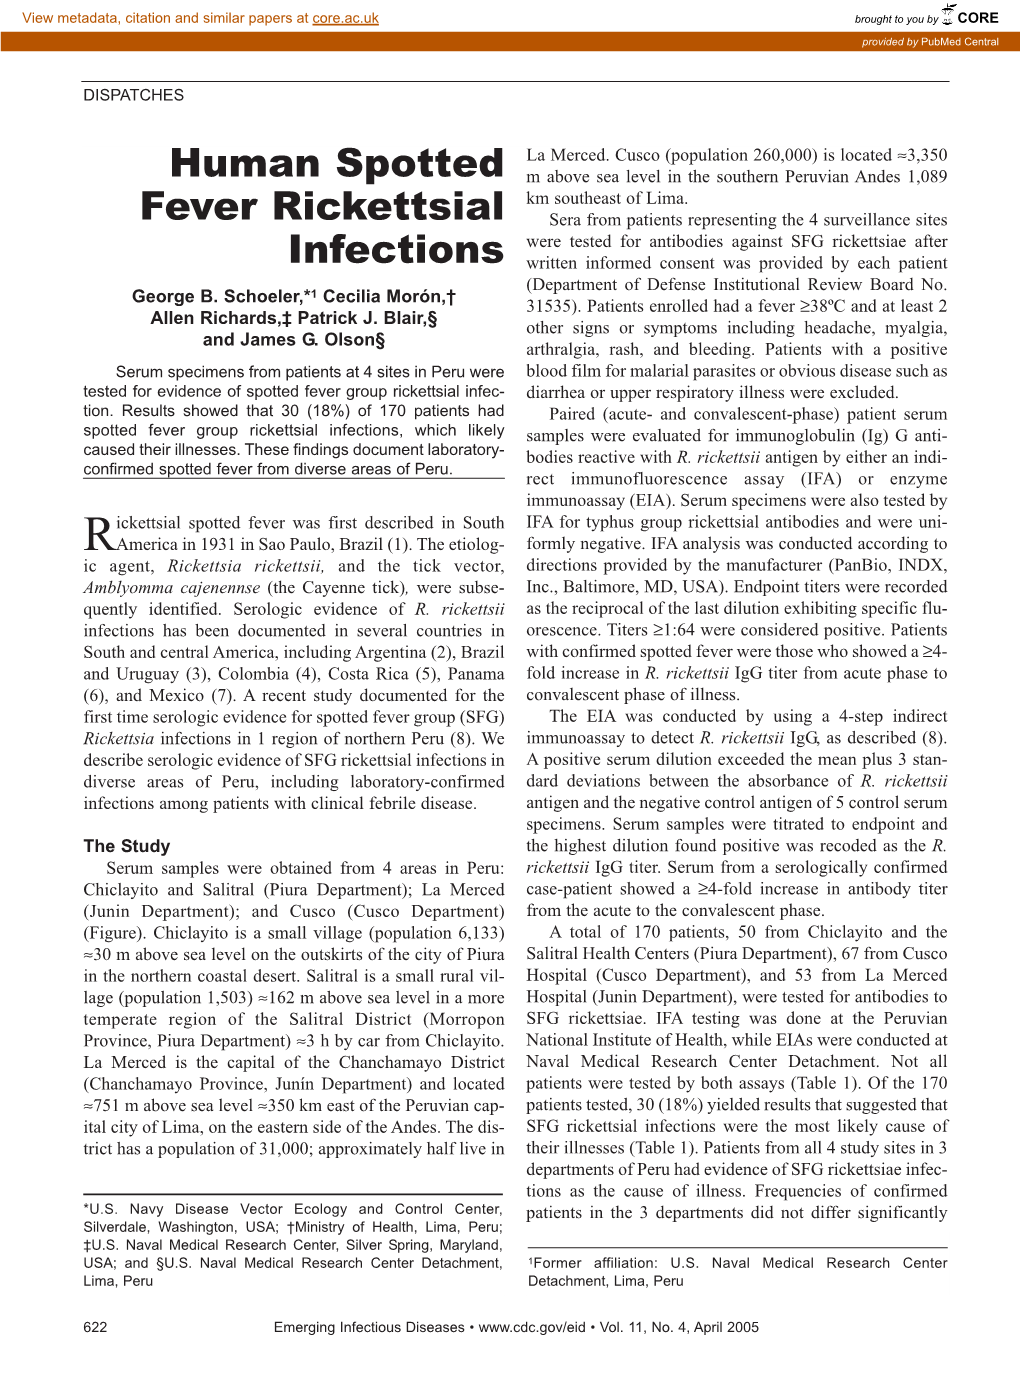 Human Spotted Fever Rickettsial Infections